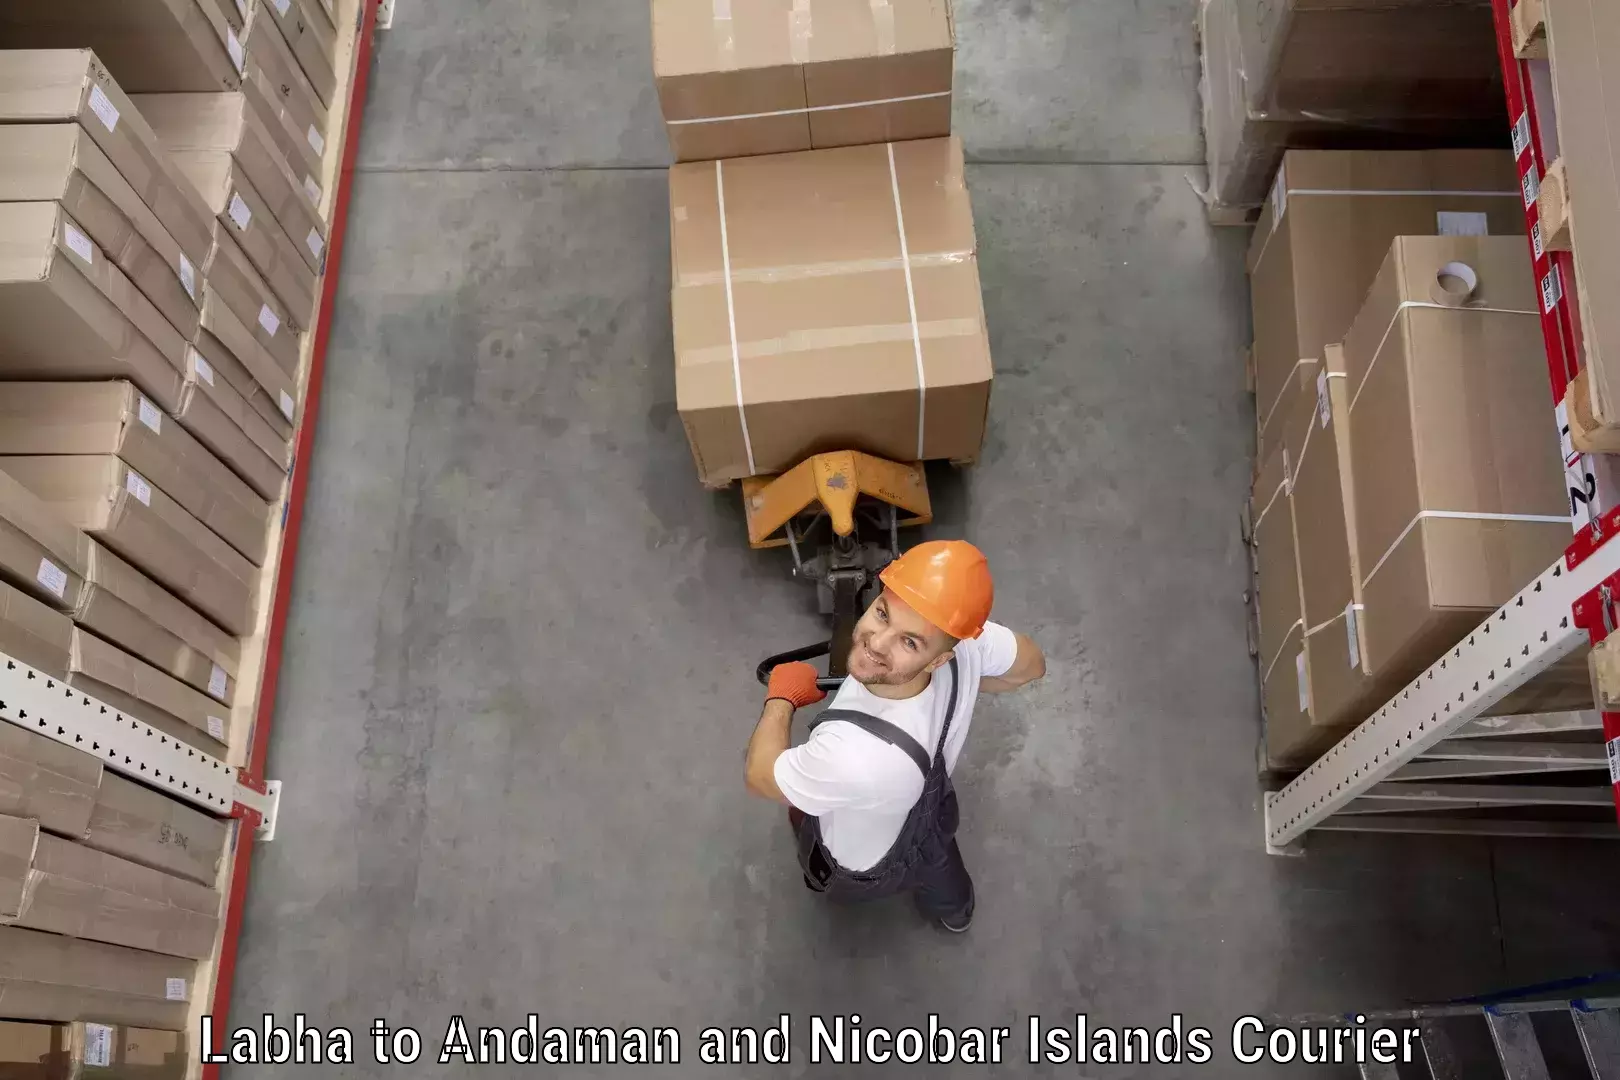 Professional courier handling in Labha to Andaman and Nicobar Islands